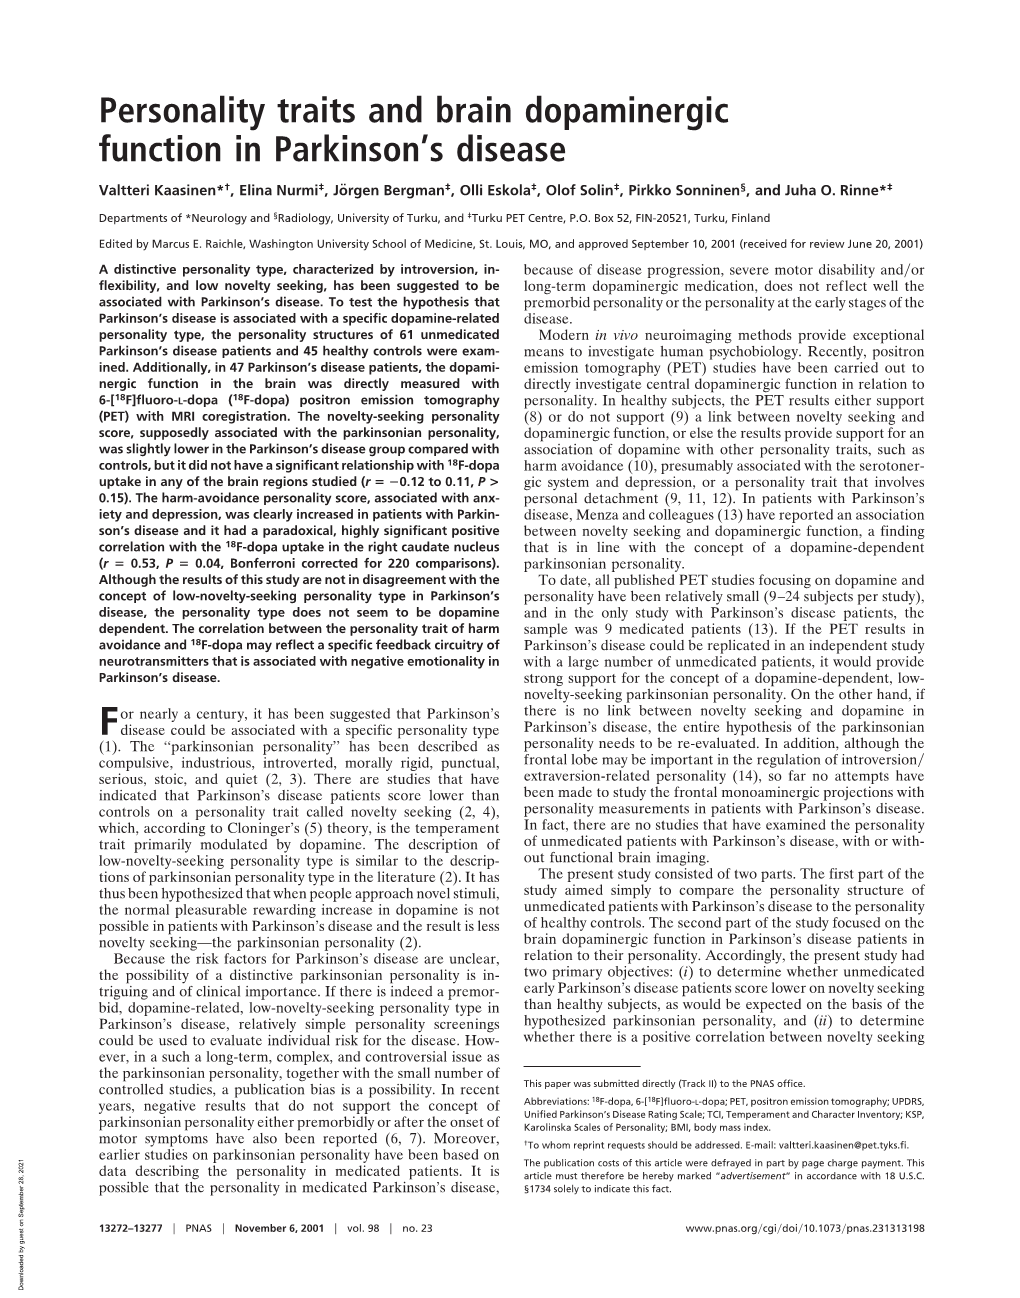 Personality Traits and Brain Dopaminergic Function in Parkinson's Disease